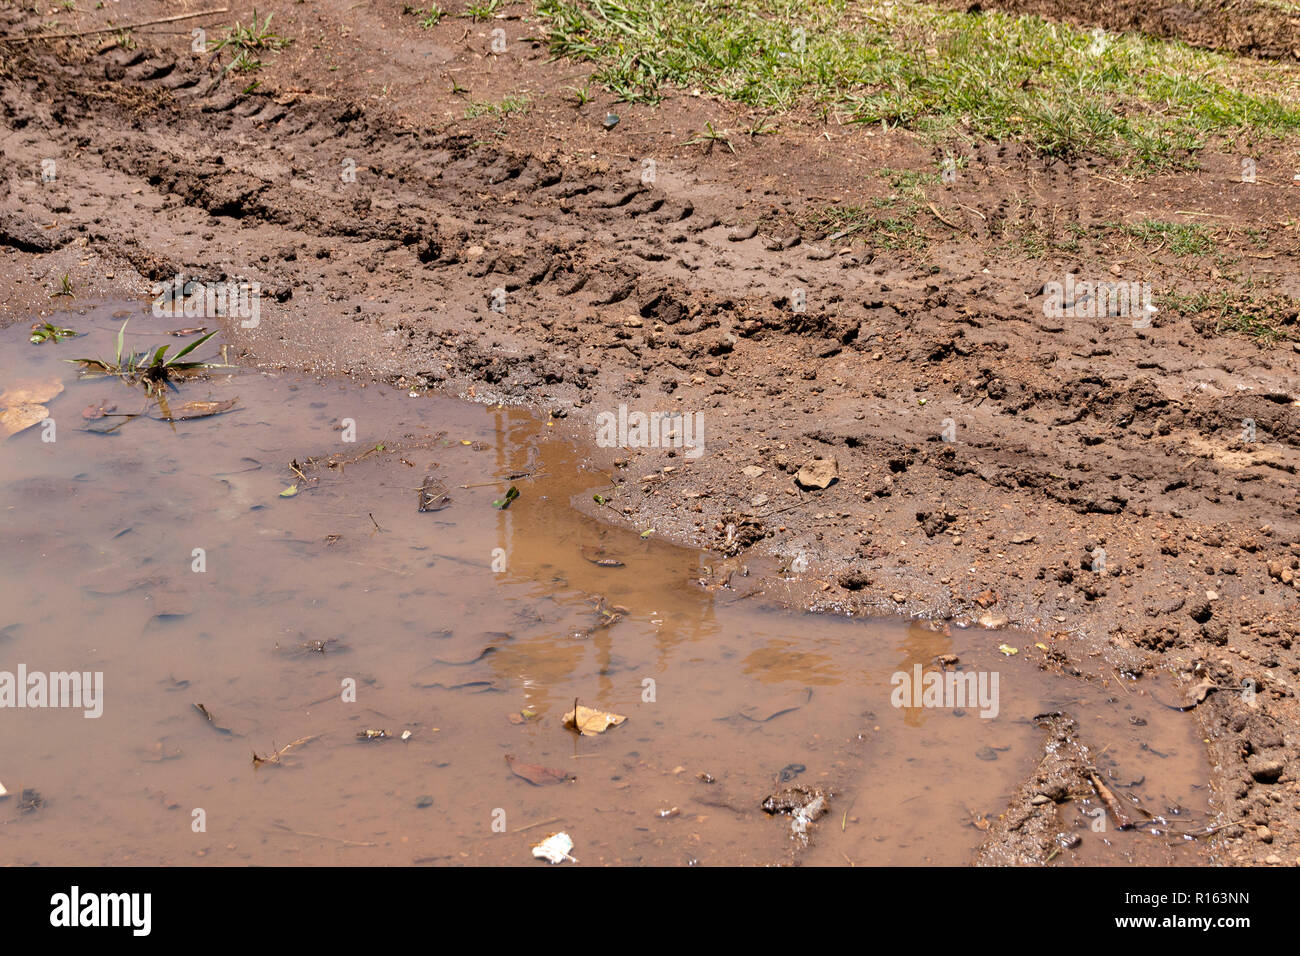 Wet Mud On The Ground With Grass In Nature Stock Photo, Picture and Royalty  Free Image. Image 80885384.